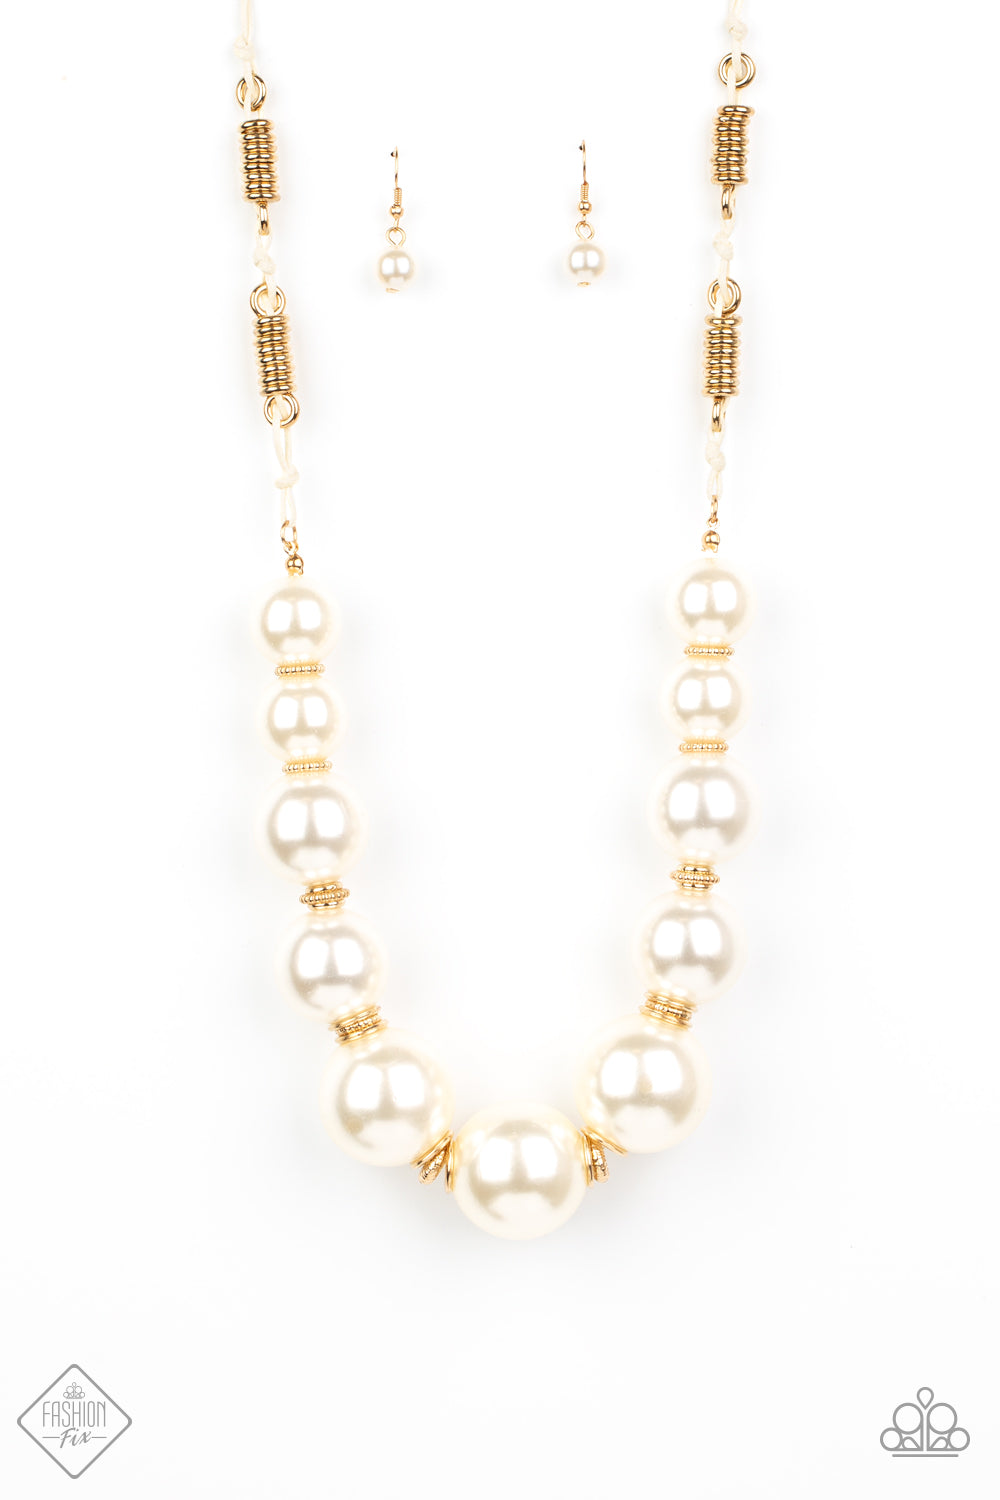 Paparazzi Accessories - Pearly Prosperity - Gold Necklace  Fashion Fix October 2020